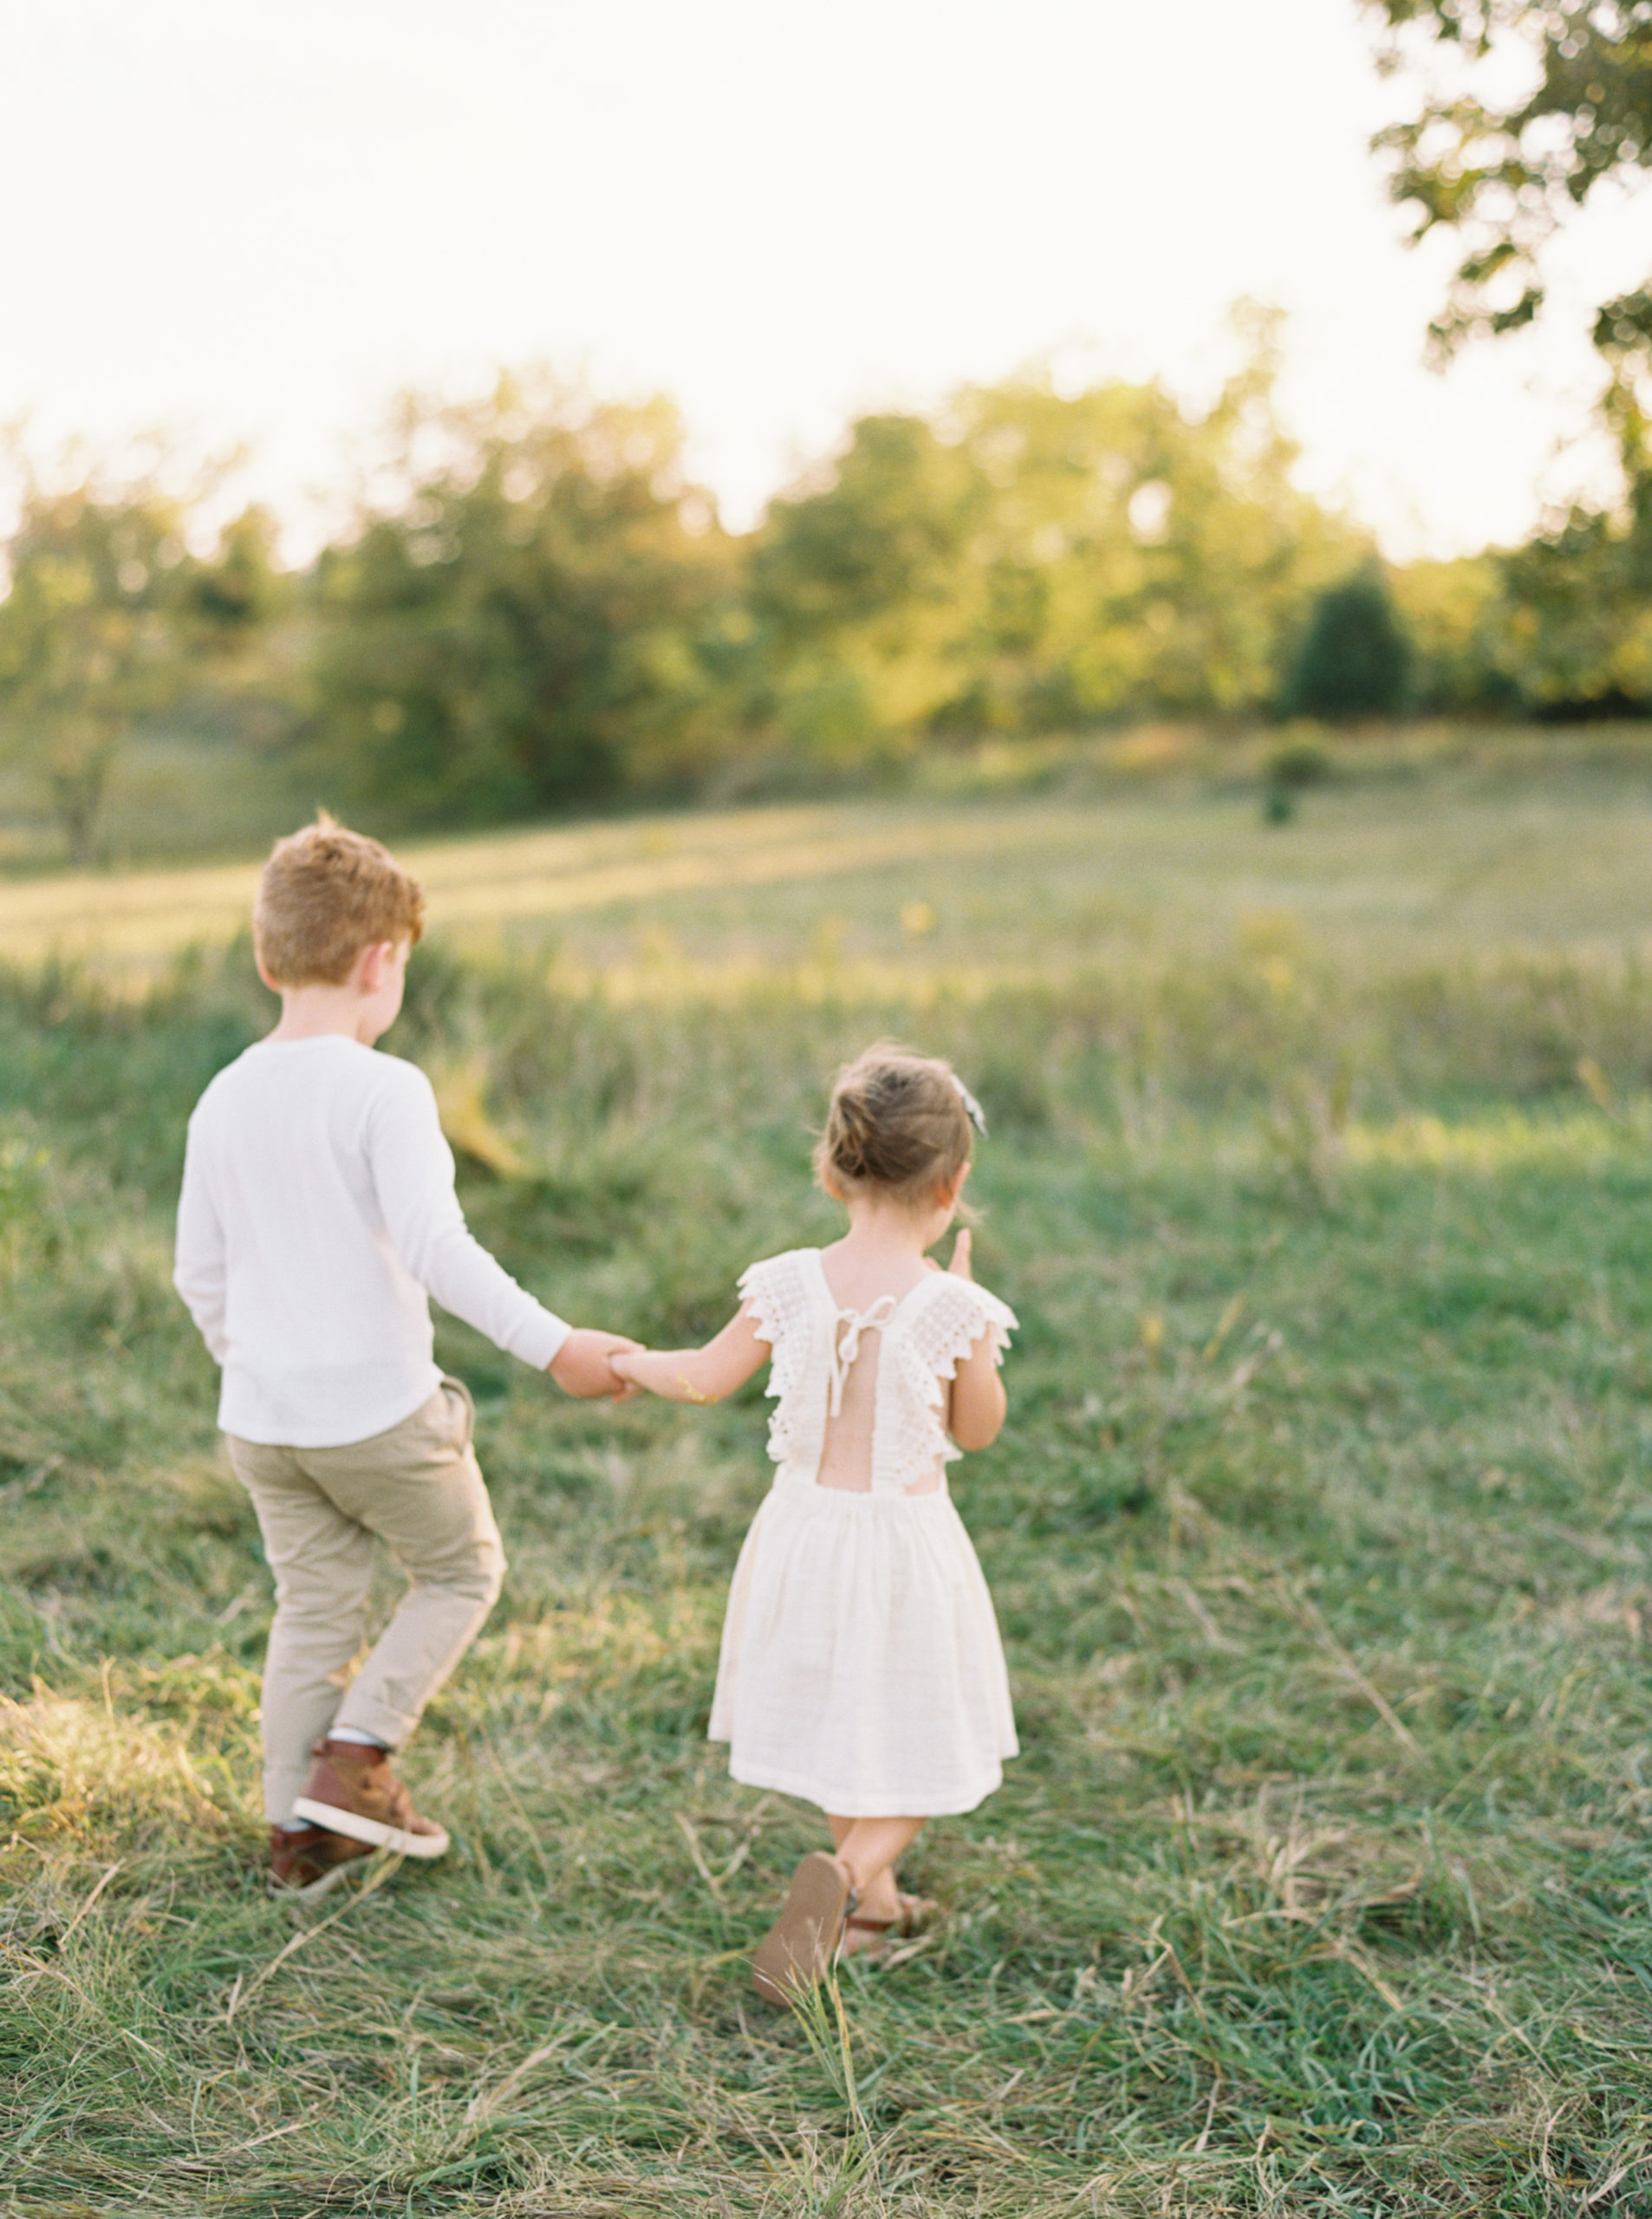 Brother and Sister in a grassy green field setting in Shorewood in the summer